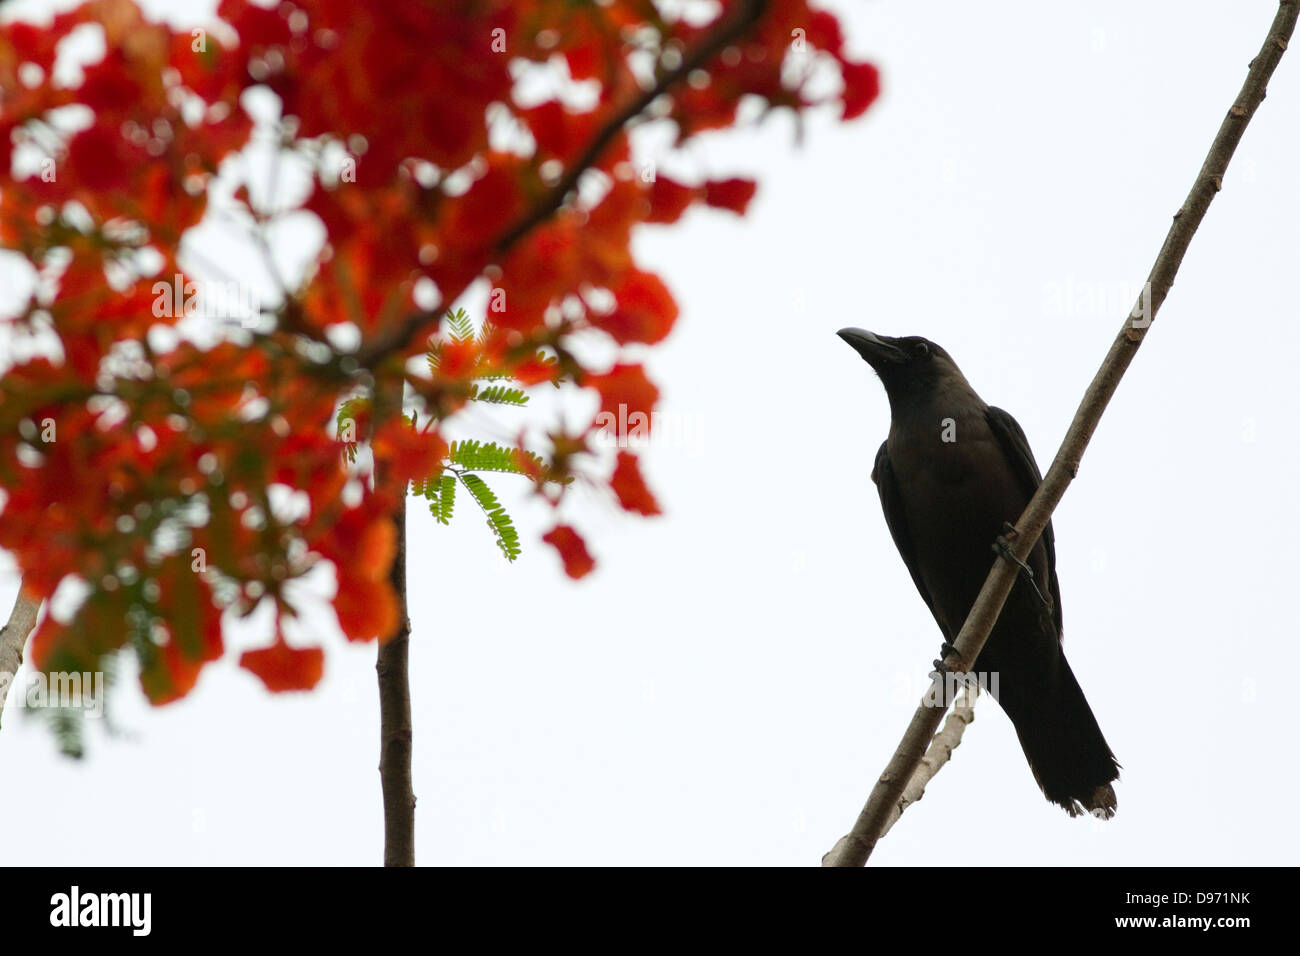 A crow perched on a Flame tree in bloom (Delonix Regia), the color black contrasted against the red of the flowers Stock Photo